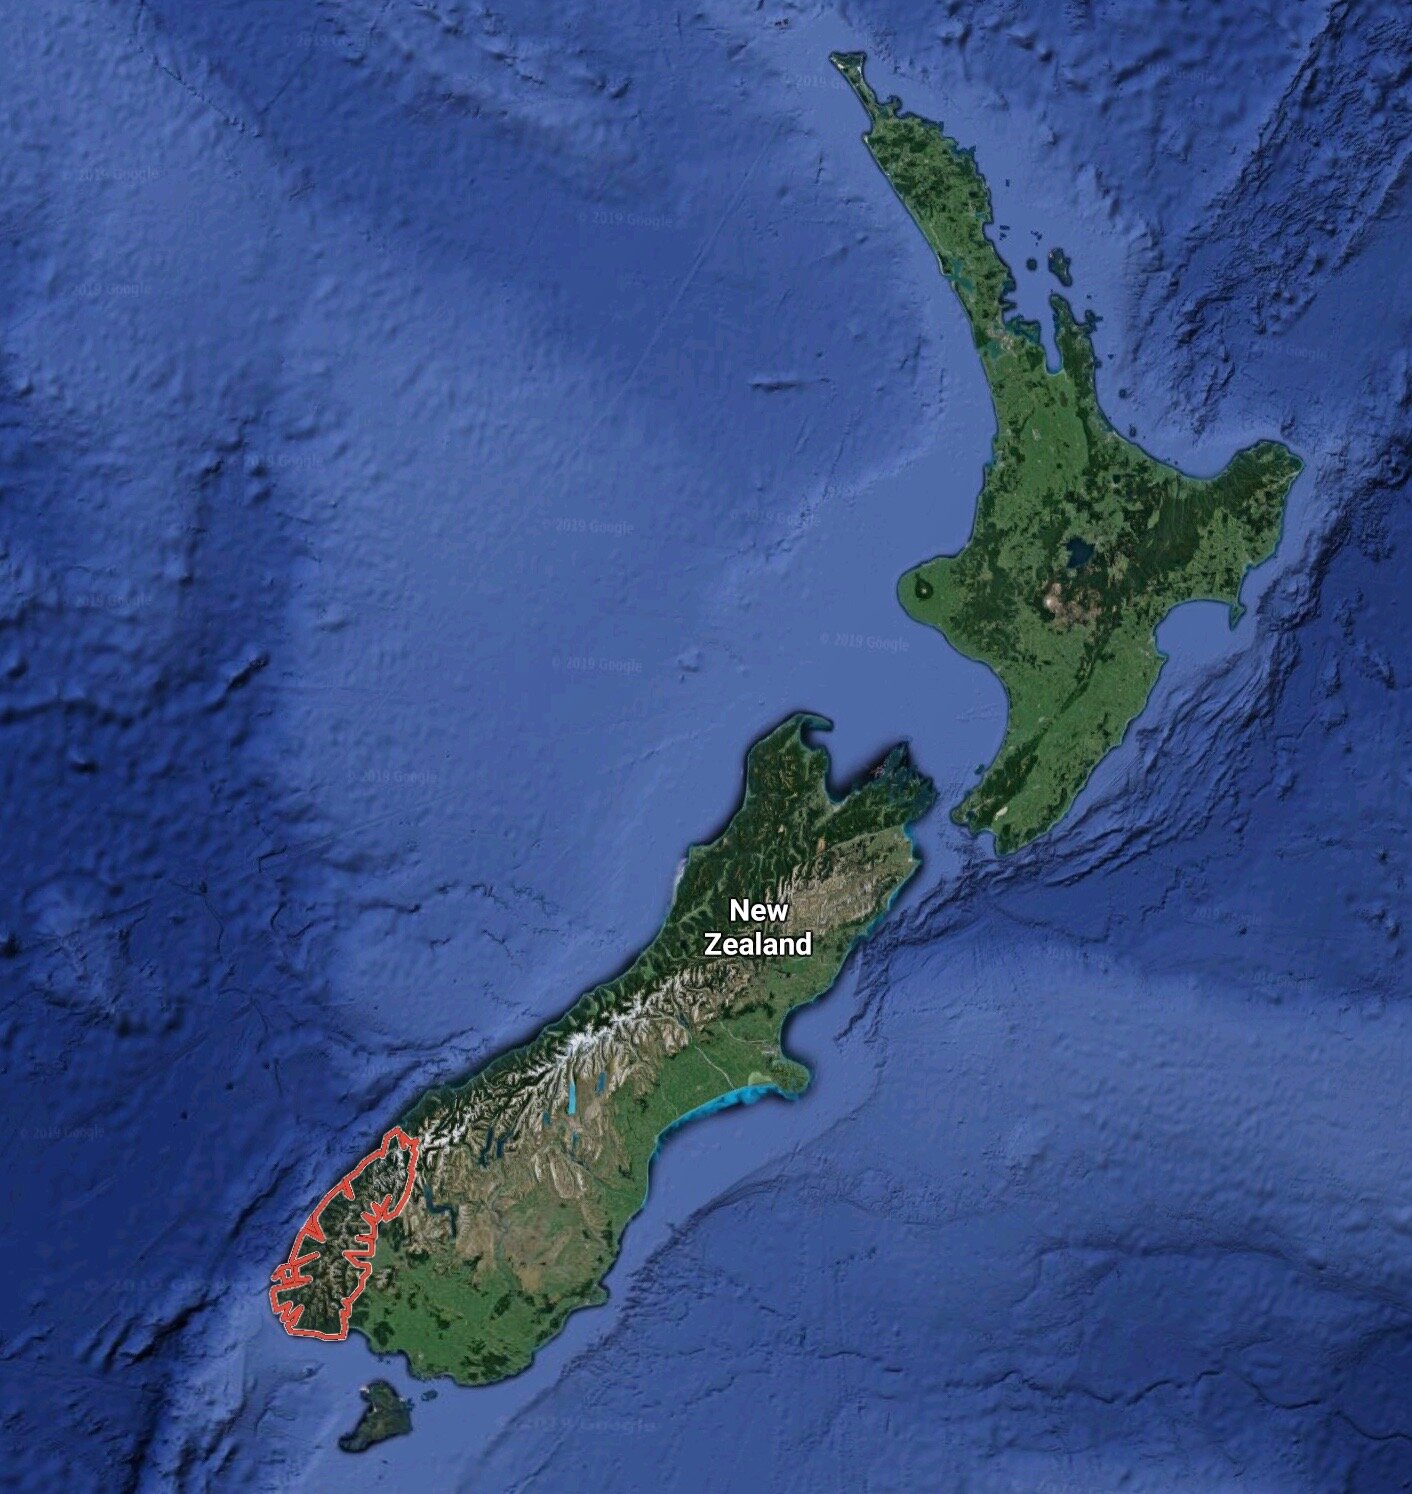 Fiorldland National Park is located in southern New Zealand and outlined in red on this map